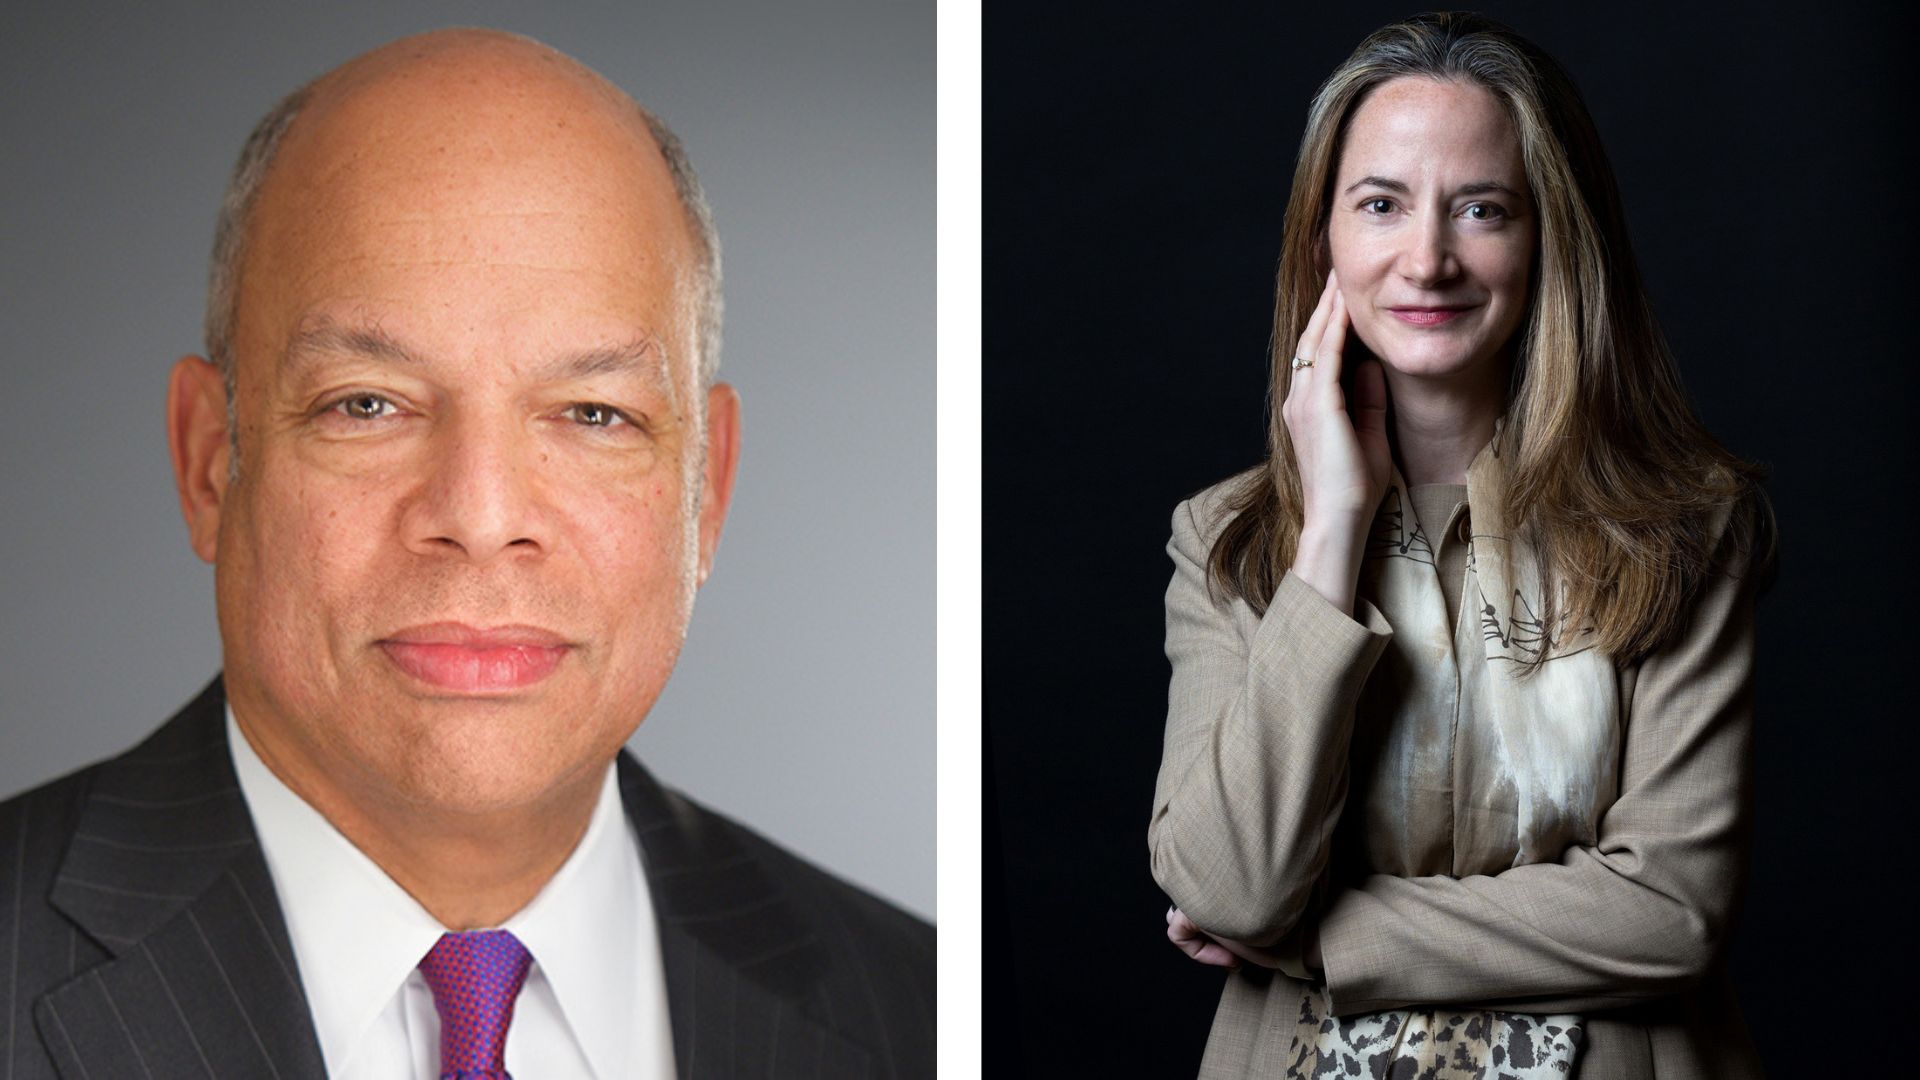 A formal photo of Secretary Jeh Johnson on the left and another photo of DNI Avril Haines on the right.